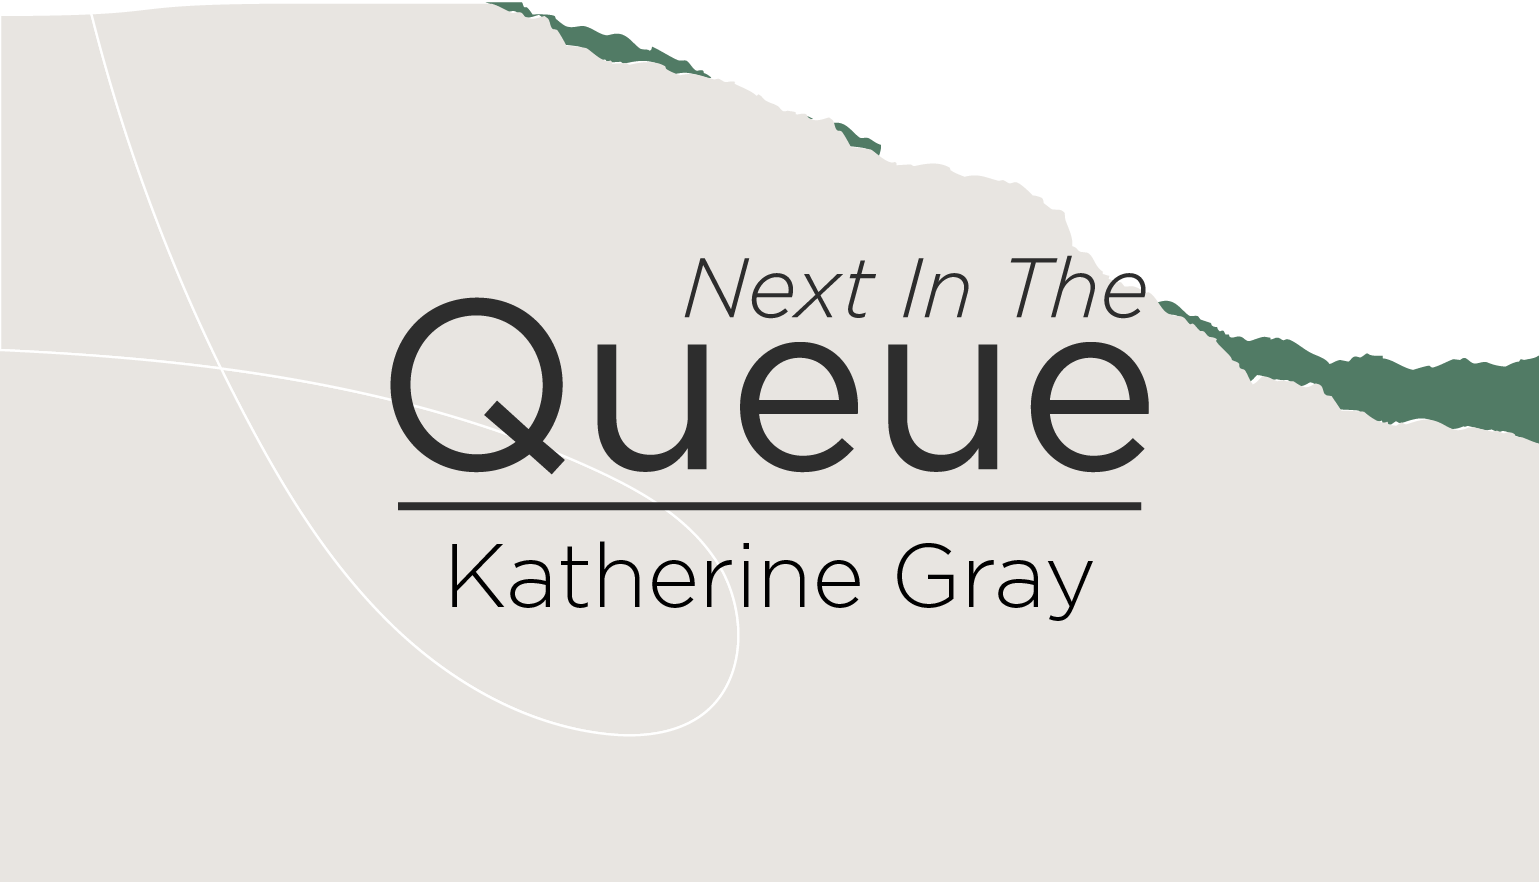 blog post cover graphic for The Queue featuring Katherine Gray